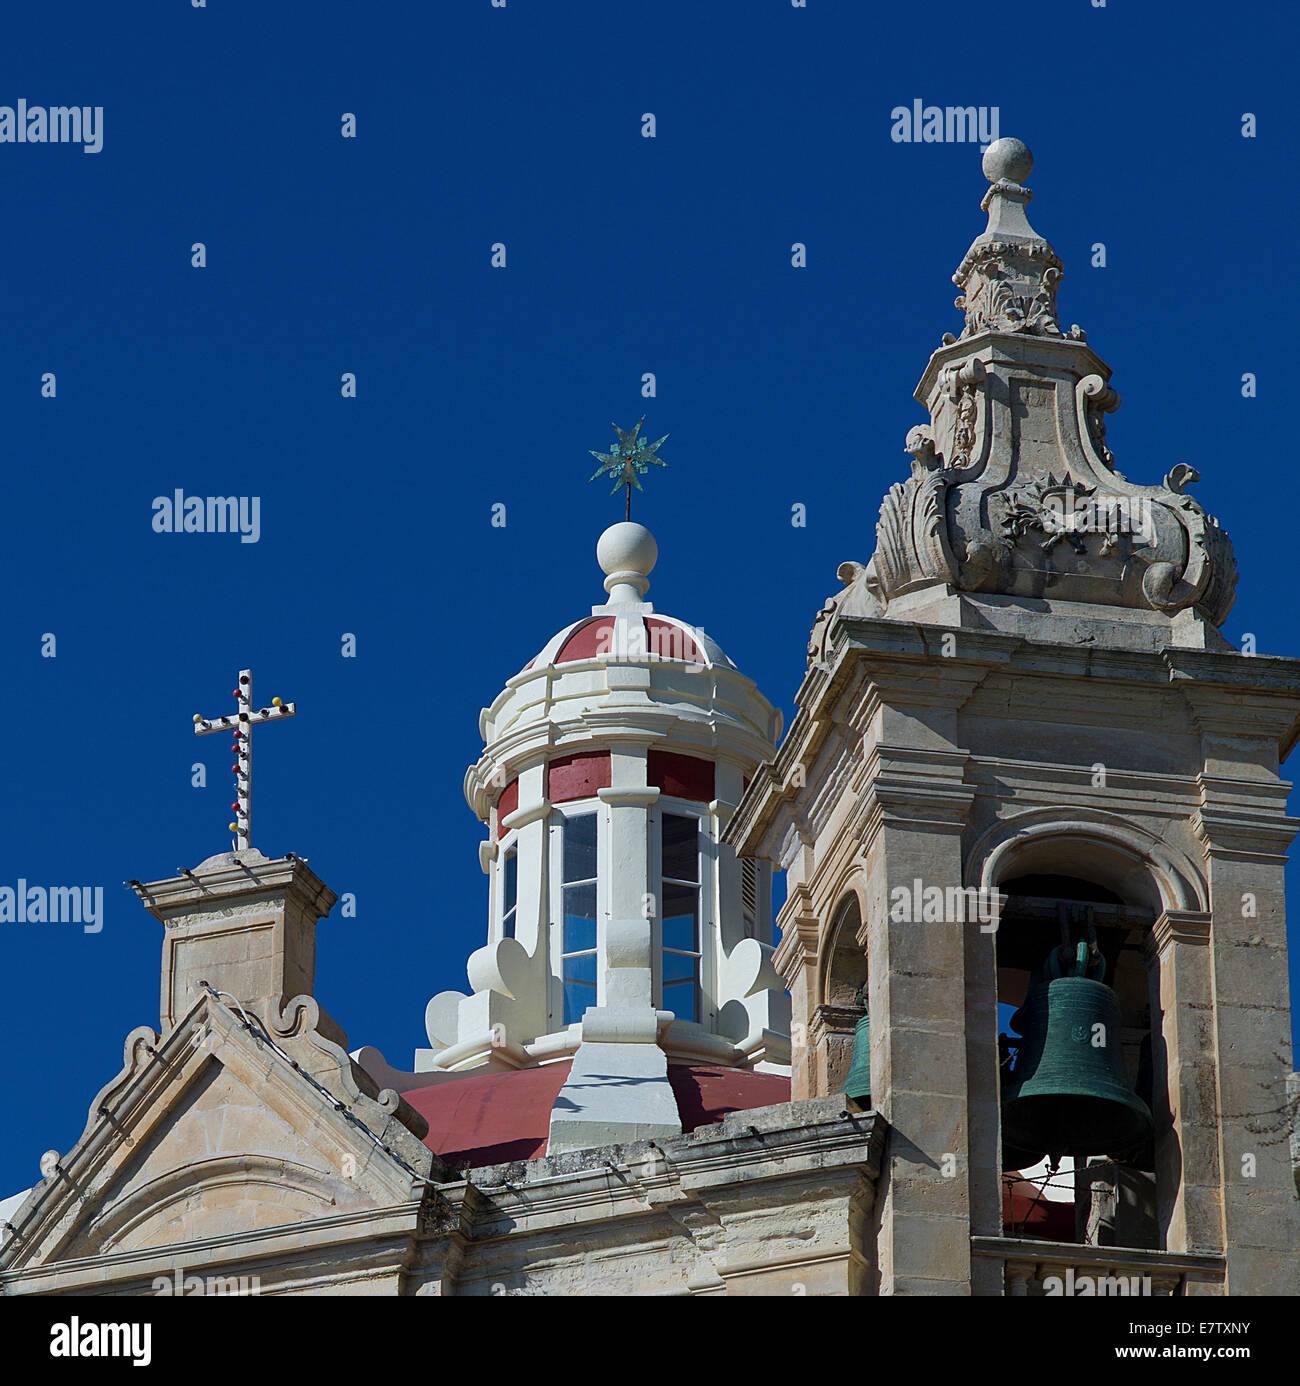 Towers, Bells and Crosses - Malta. Stock Photo